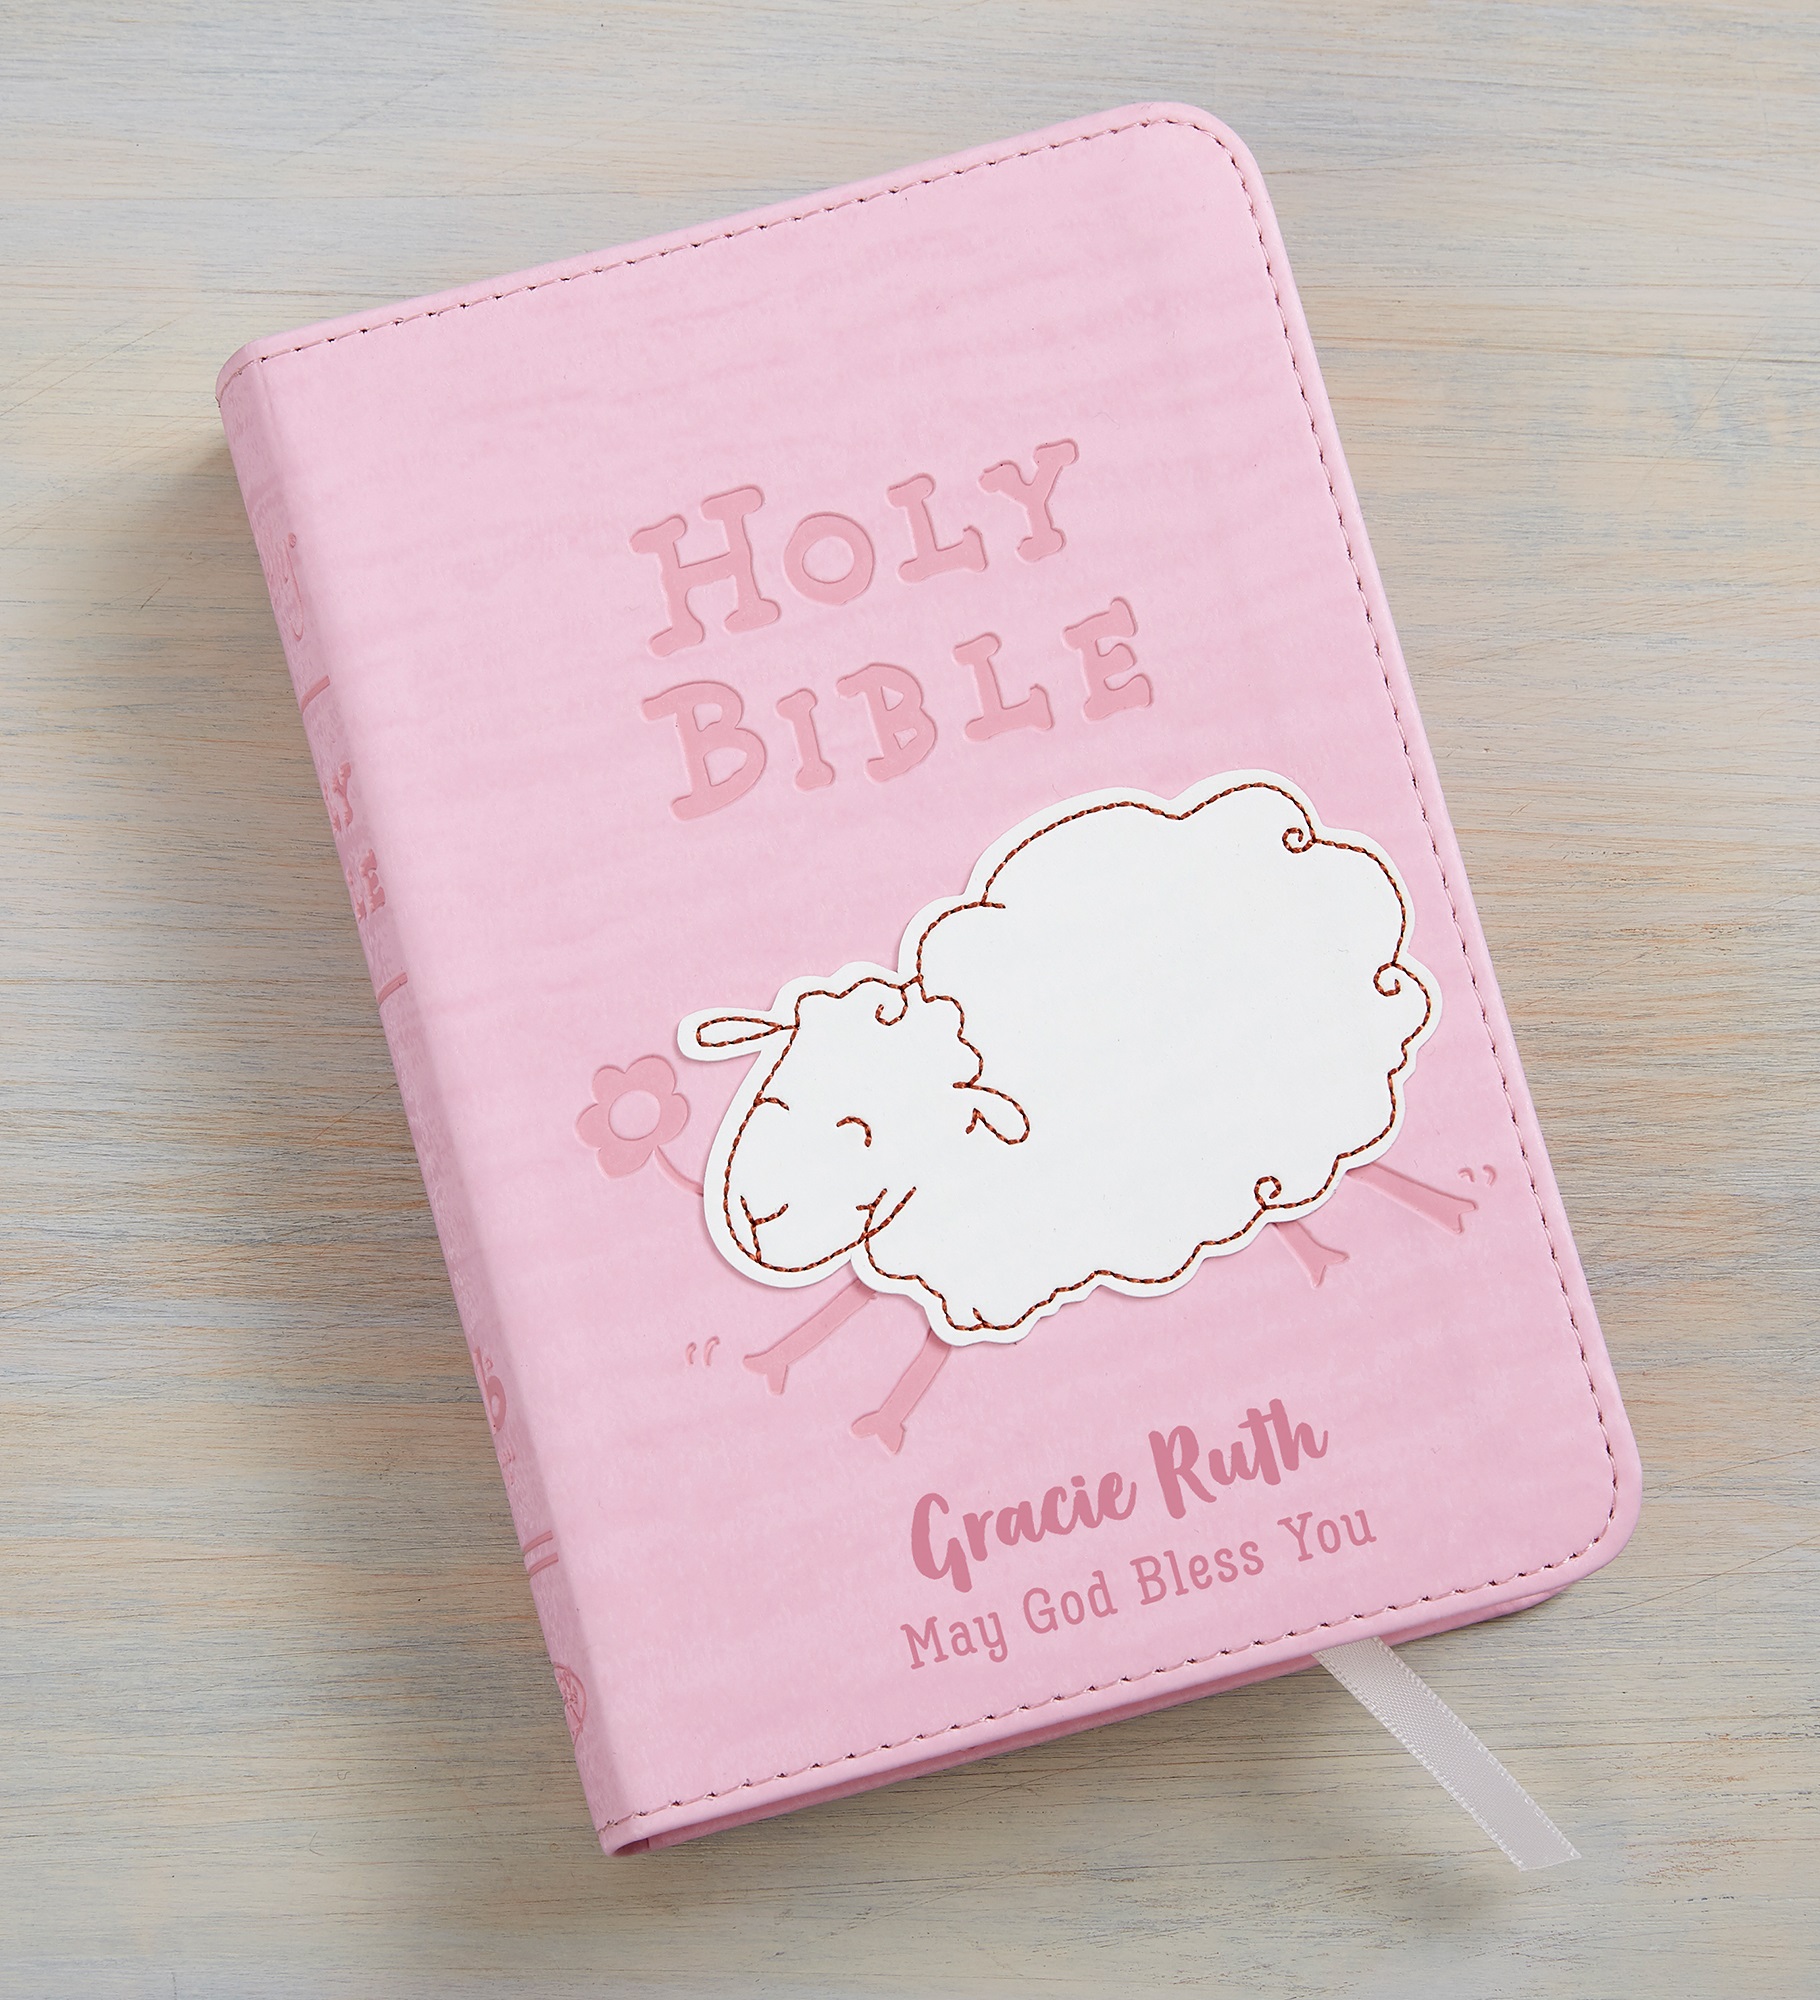 Woolly Lamb Personalized Children's Bible